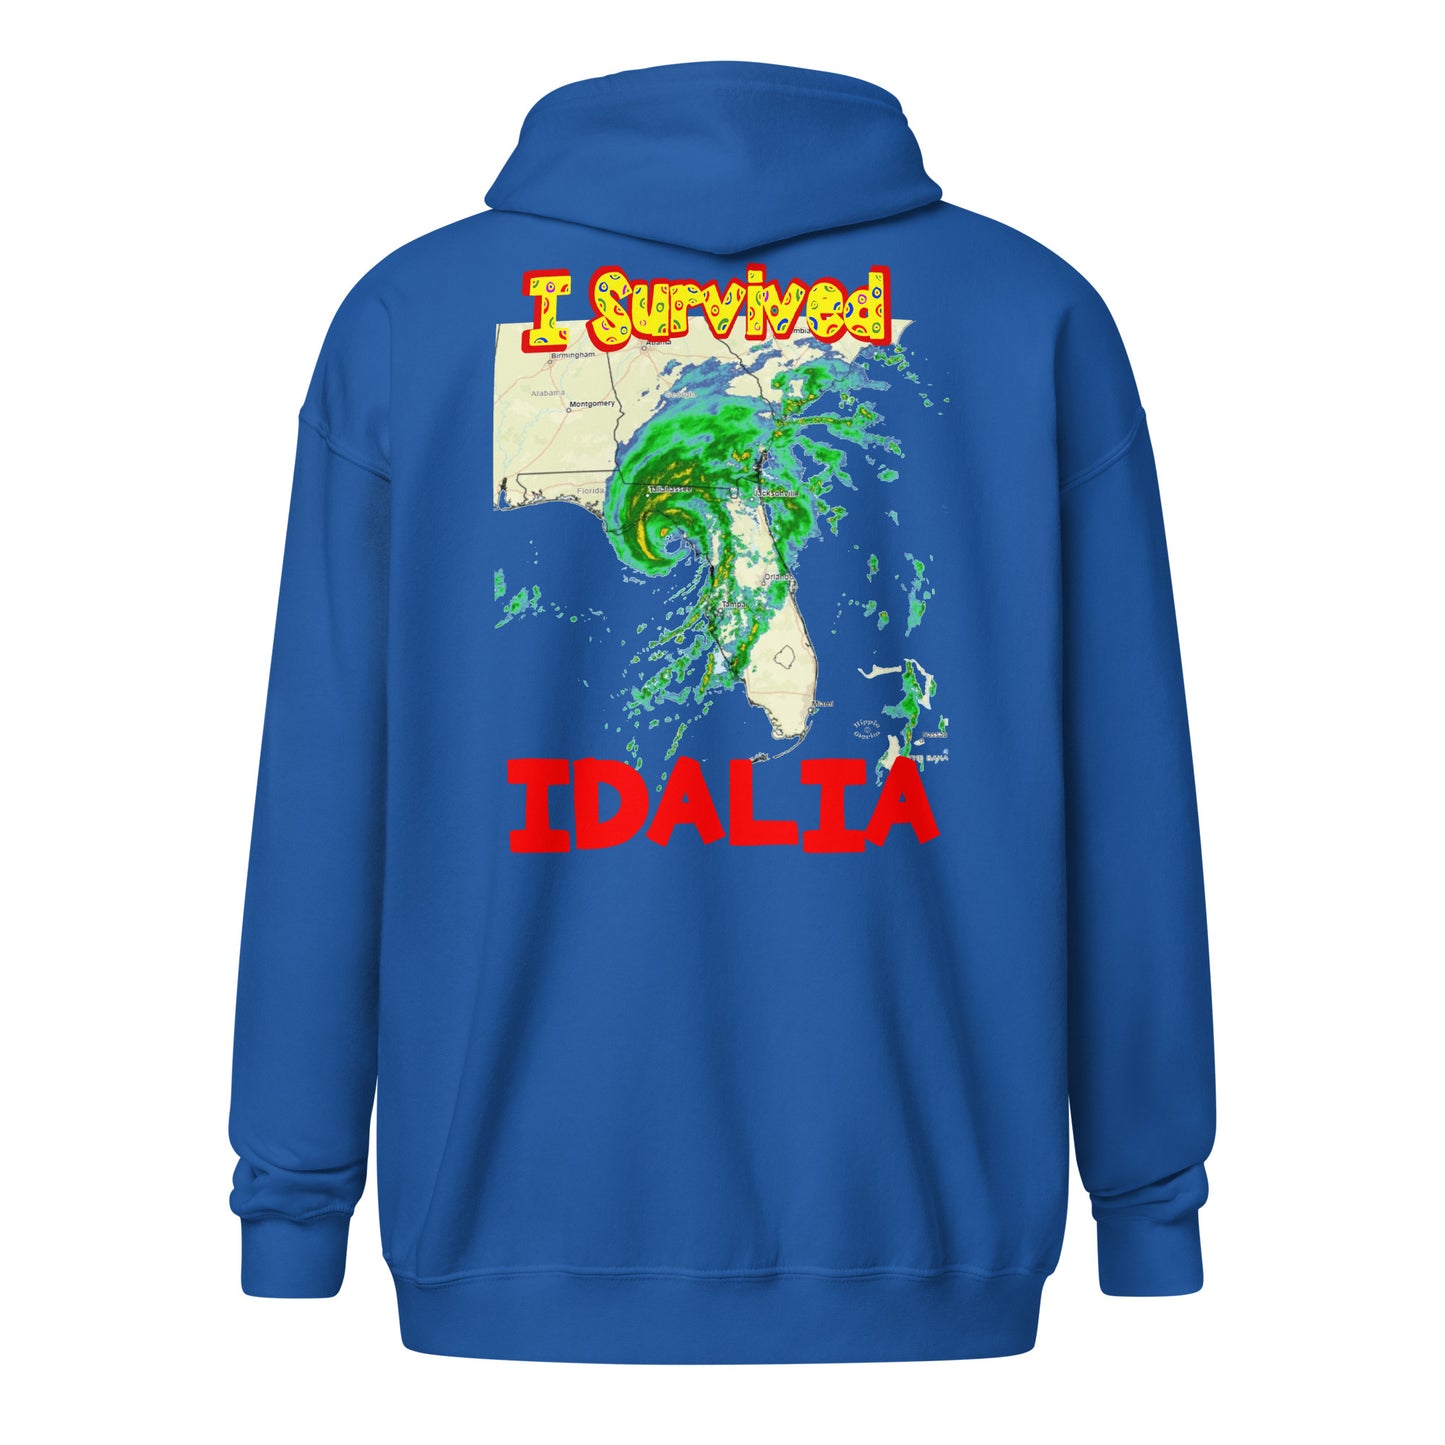 A cut out picture of a hoodie with back print design of I SURVIVED Hurricane IDALIA Unisex Heavy Blend Zip Hoodie in royal blue